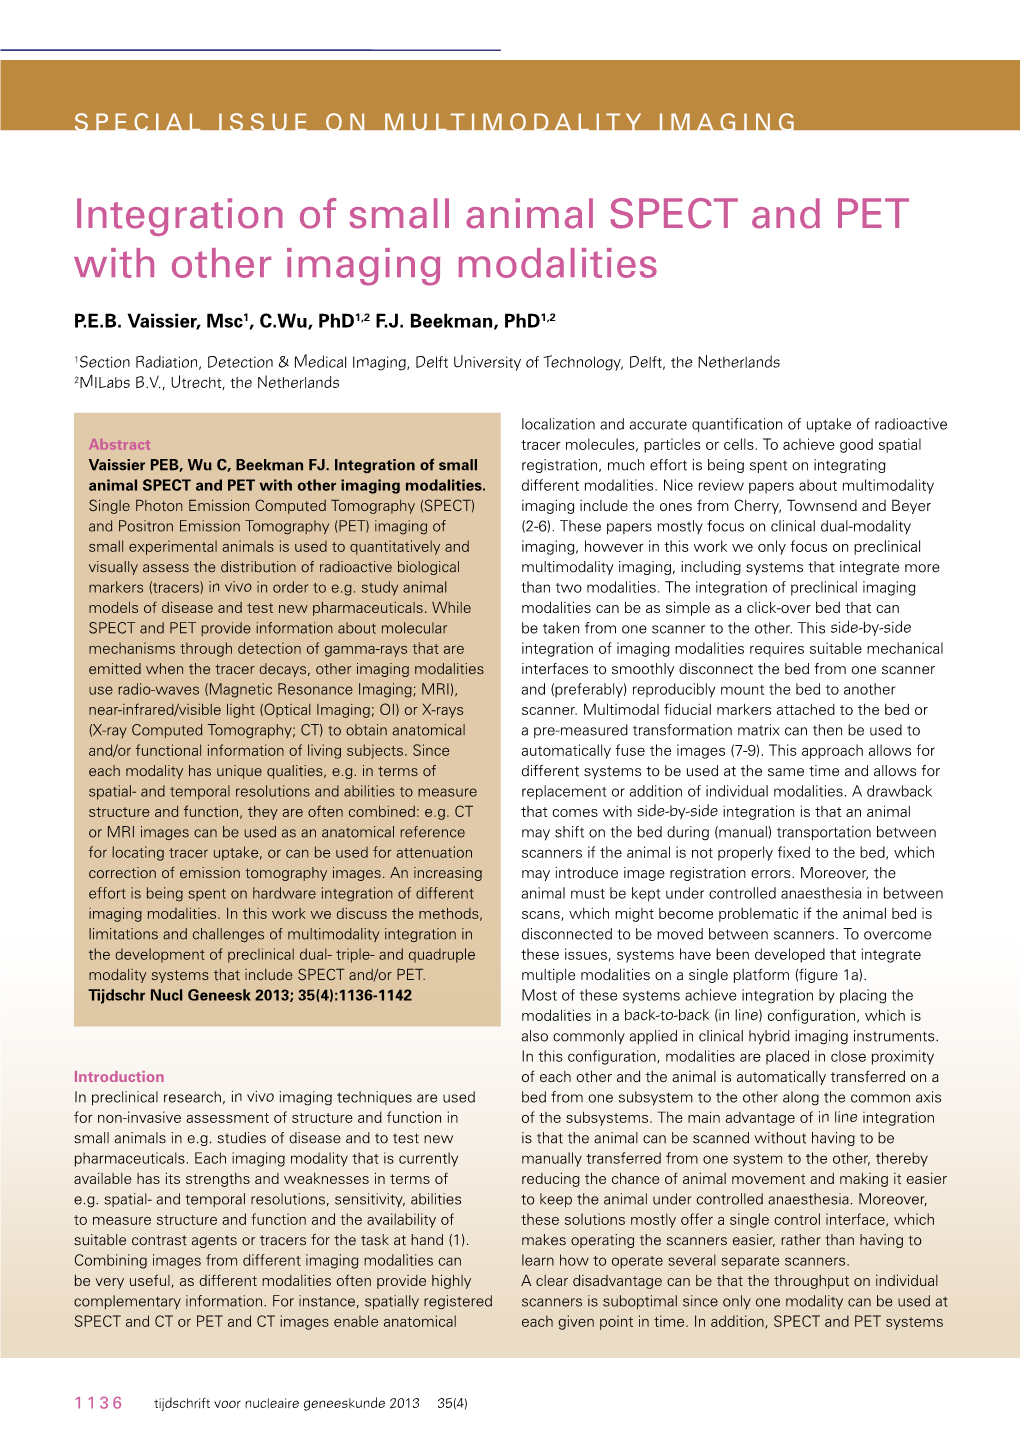 Integration of Small Animal SPECT and PET with Other Imaging Modalities